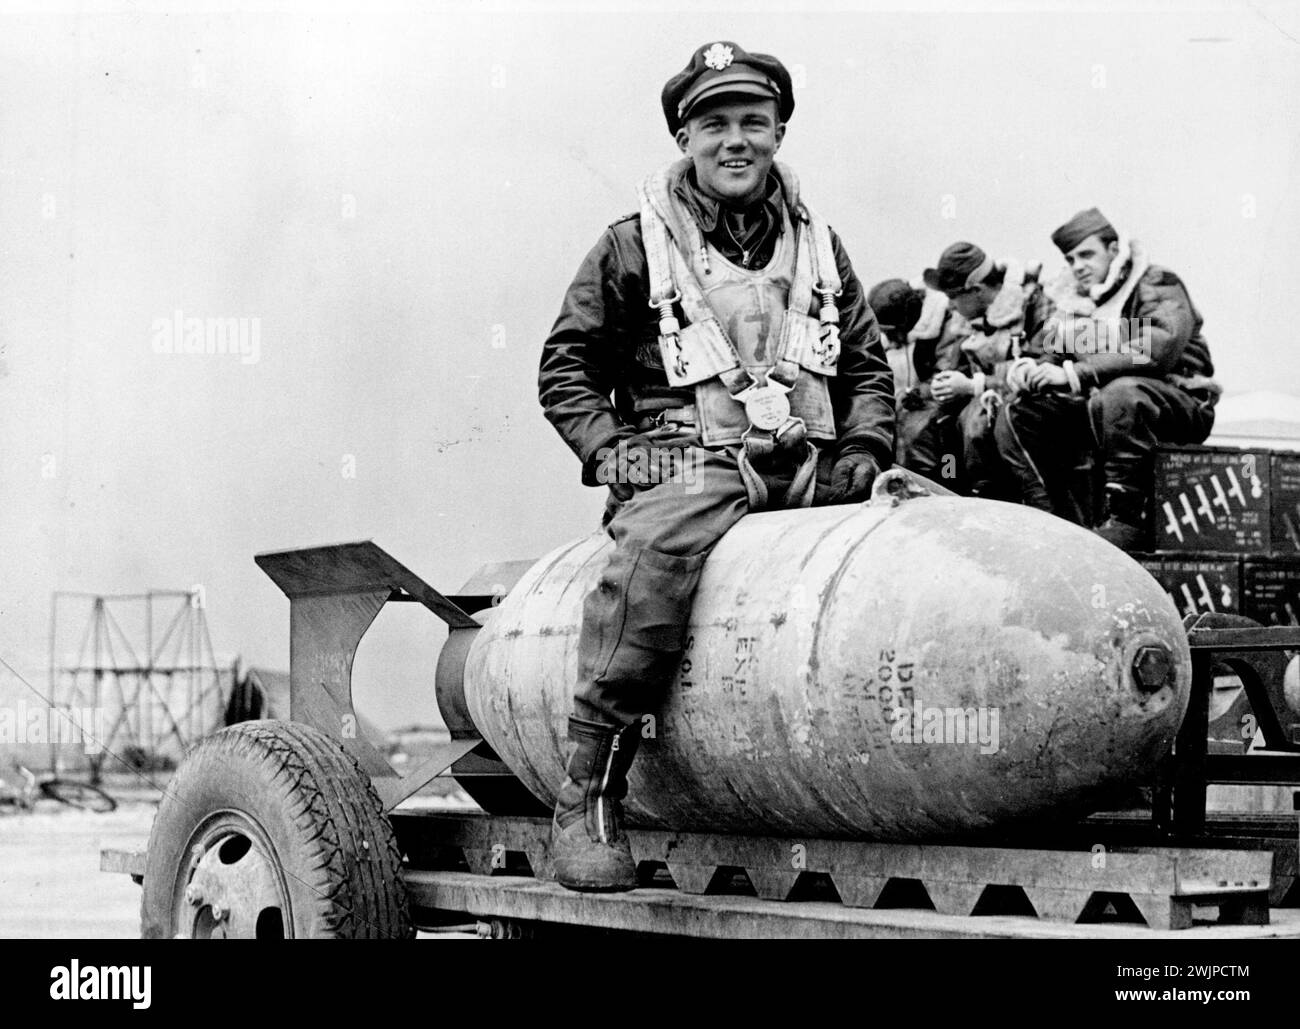 Defensive Power Of The Flying Fortresses. -- 2nd. Lt. Stanley R. Stedt of Stockholm, M.E., sitting on a 2,000lb, bomb. The entire defensive equipment of a Flying Fortress (not counting the weight of gunners, their oxygen supply, heating, clothing, etc.,) is more than 5,700 lbs. This immense weight of defensive armament necessary for successful between bomb loads for daylight or night operations. September 28, 1943. (Photo by London News Agency Photos). Stock Photo